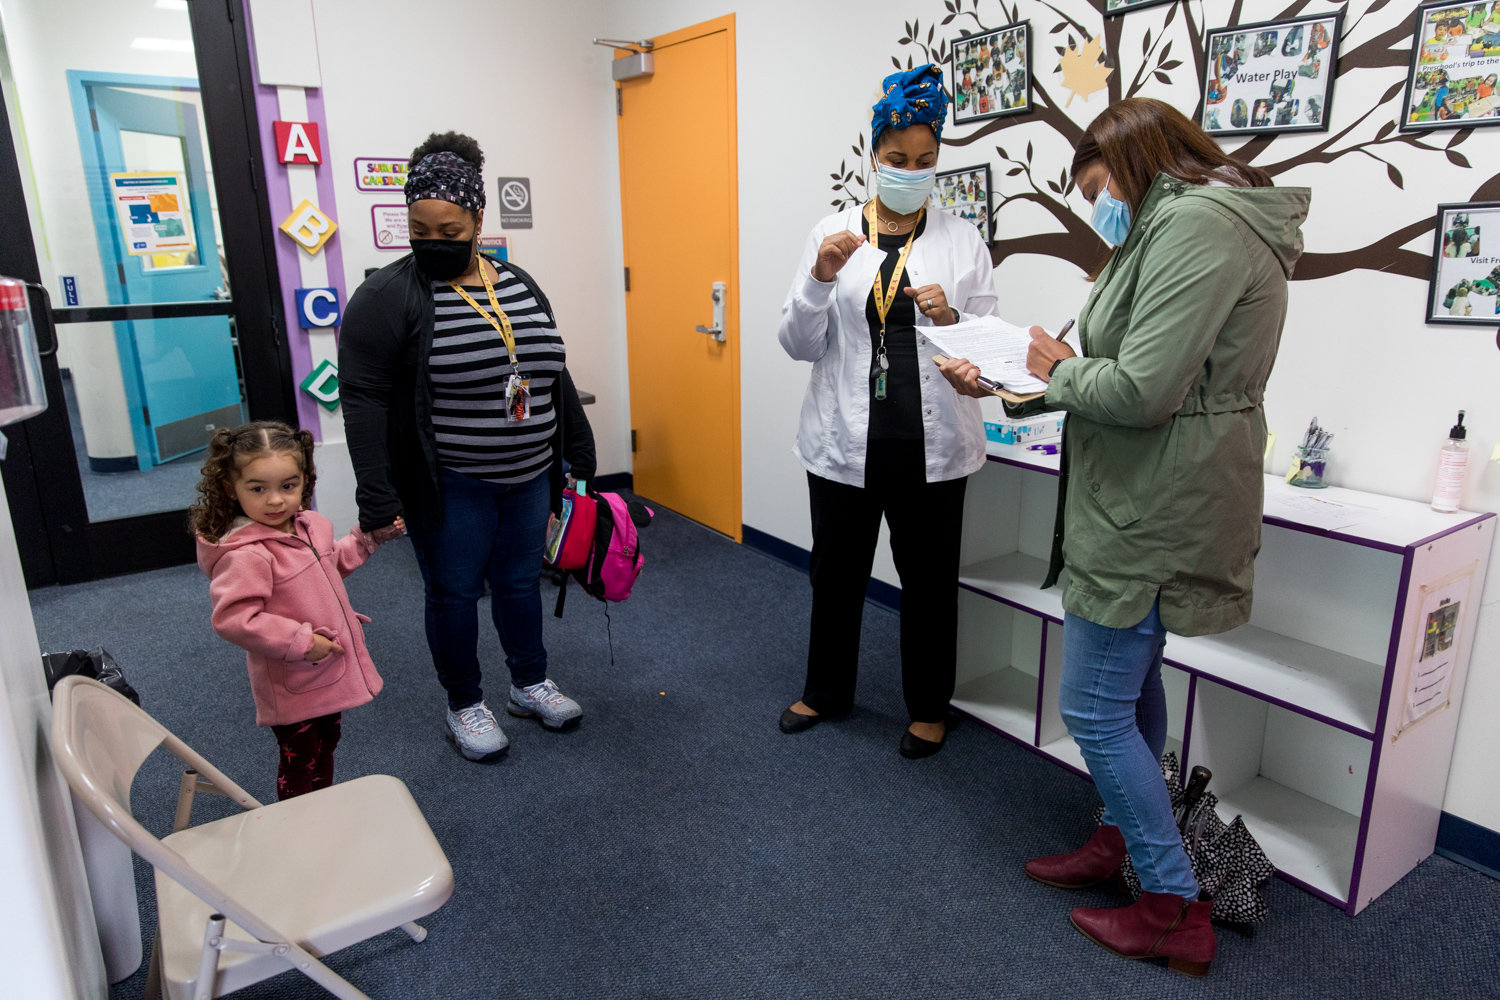 Roxana Vazquez, right, fills out a form while picking up her daughter Mia from The Learning Experience. It’s at that Riverdale Avenue facility where Mia receives free care by day while Vazquez works as a clinical social worker in Westchester County.